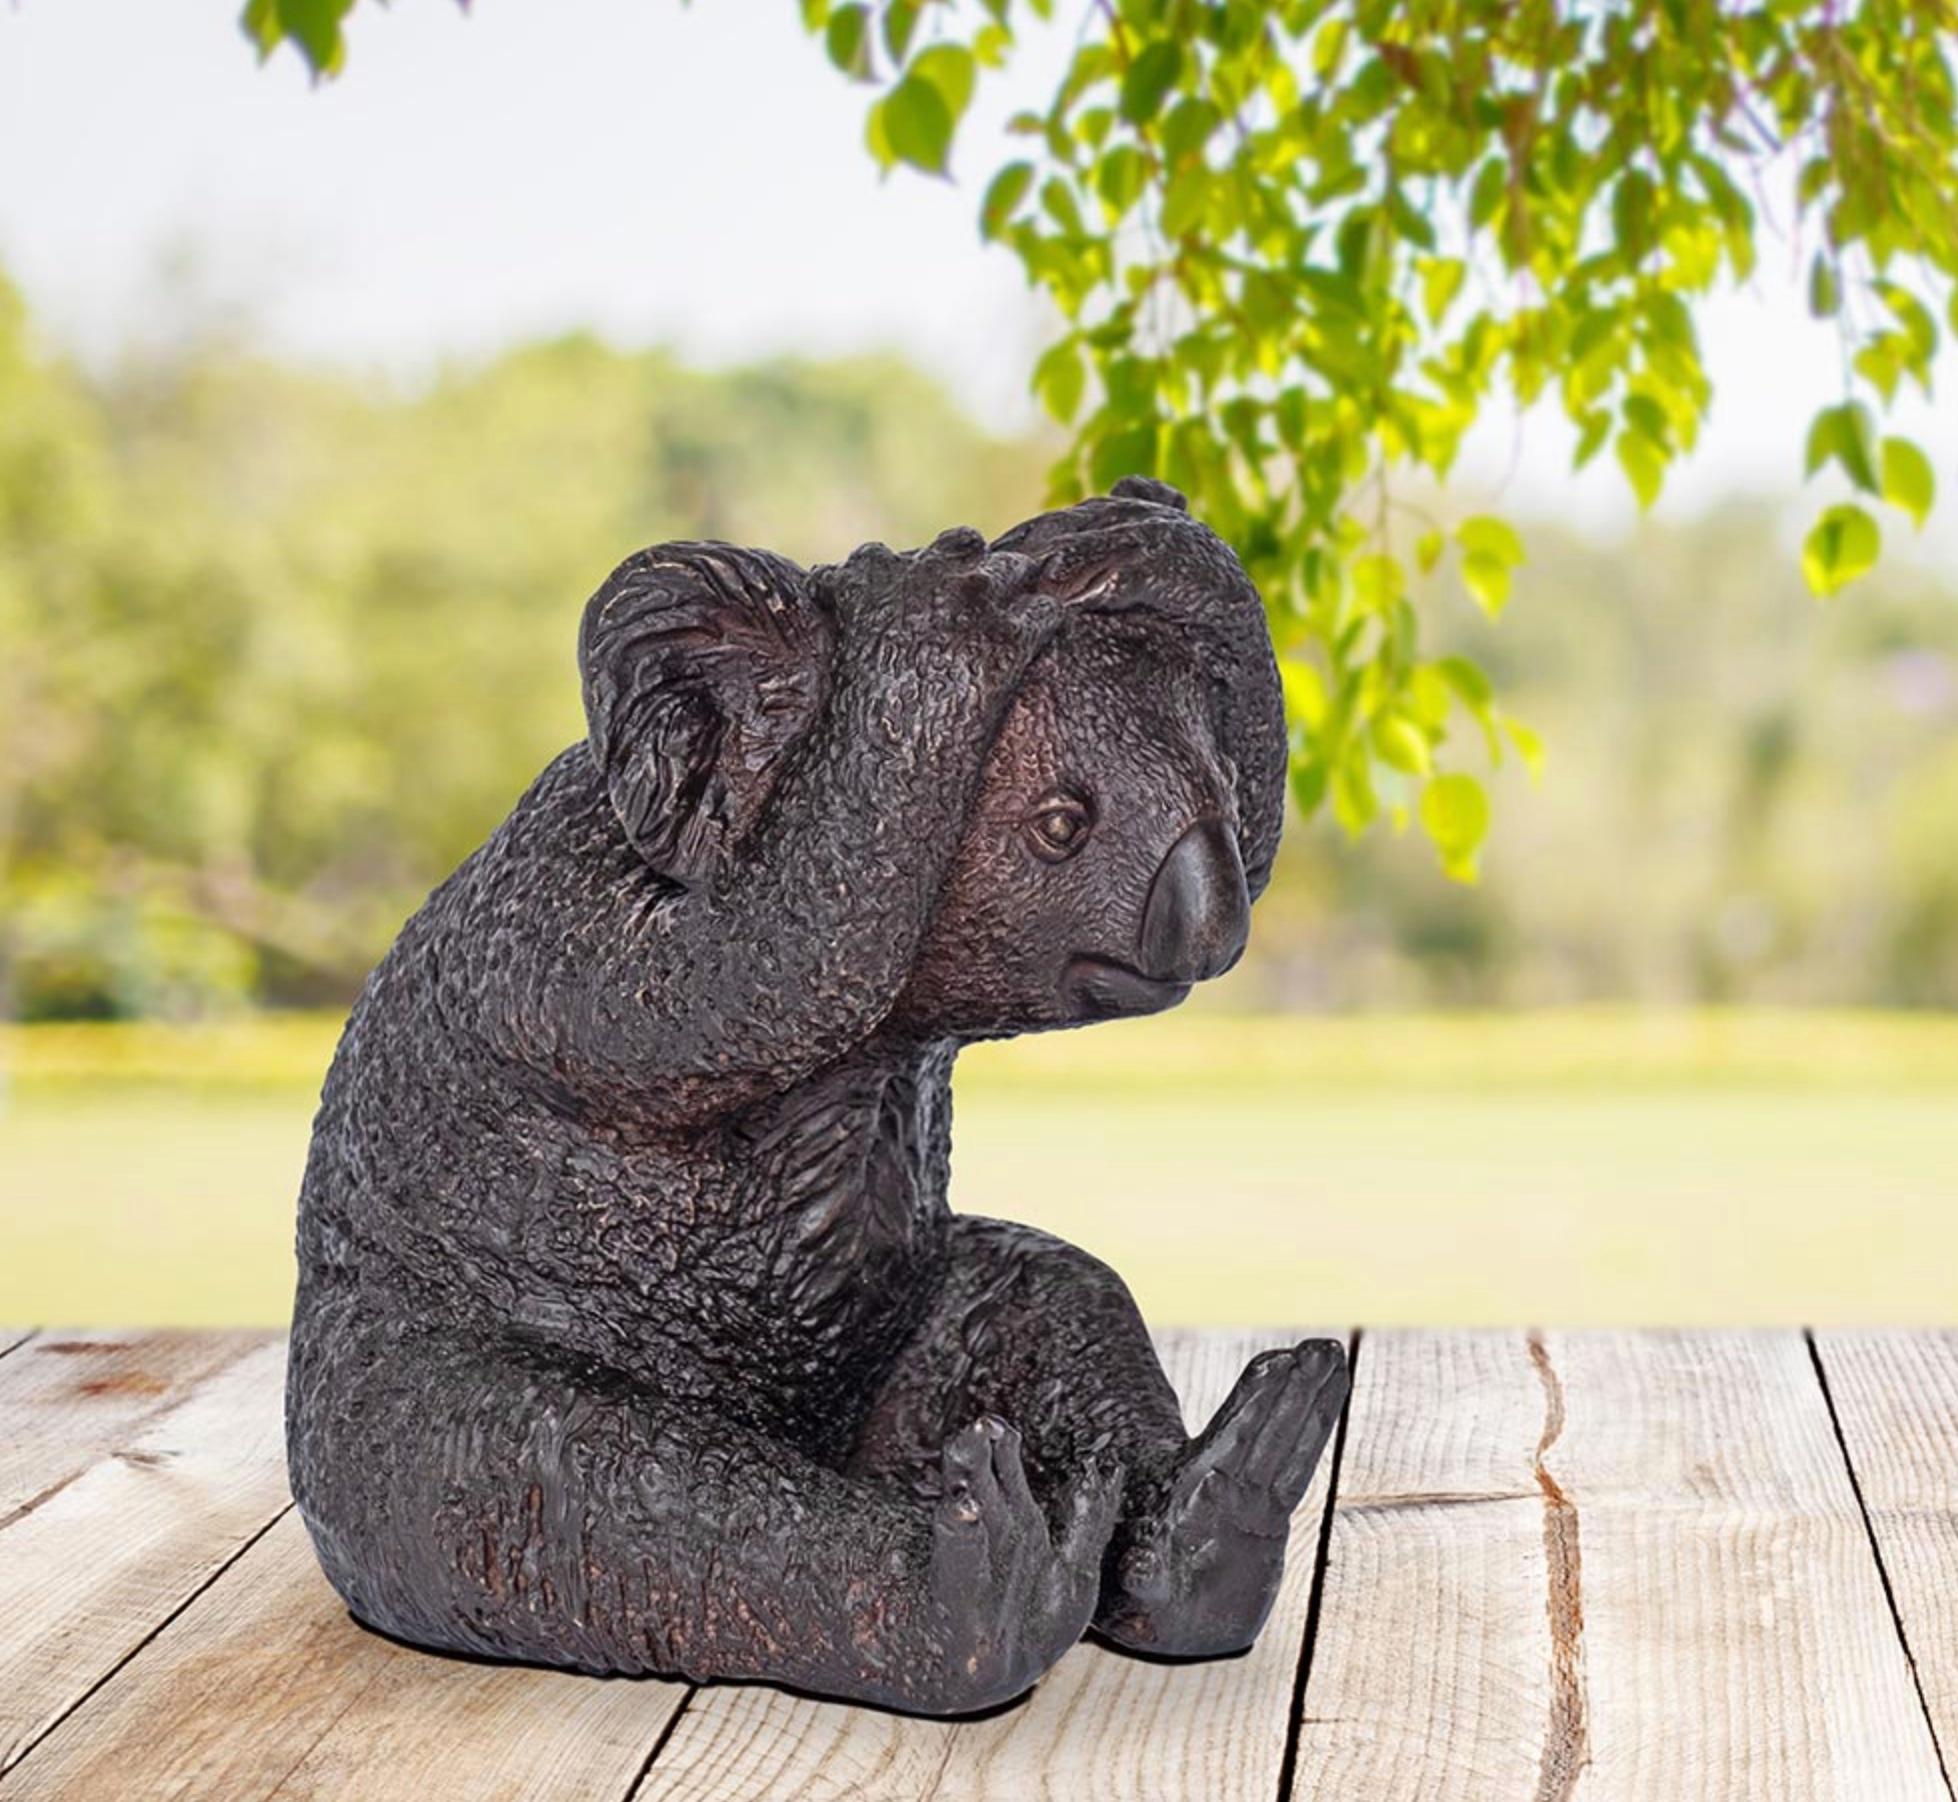 Authentic Bronze Kevin The koala feels shy Sculpture by Gillie and Marc - Contemporary Art by Gillie and Marc Schattner